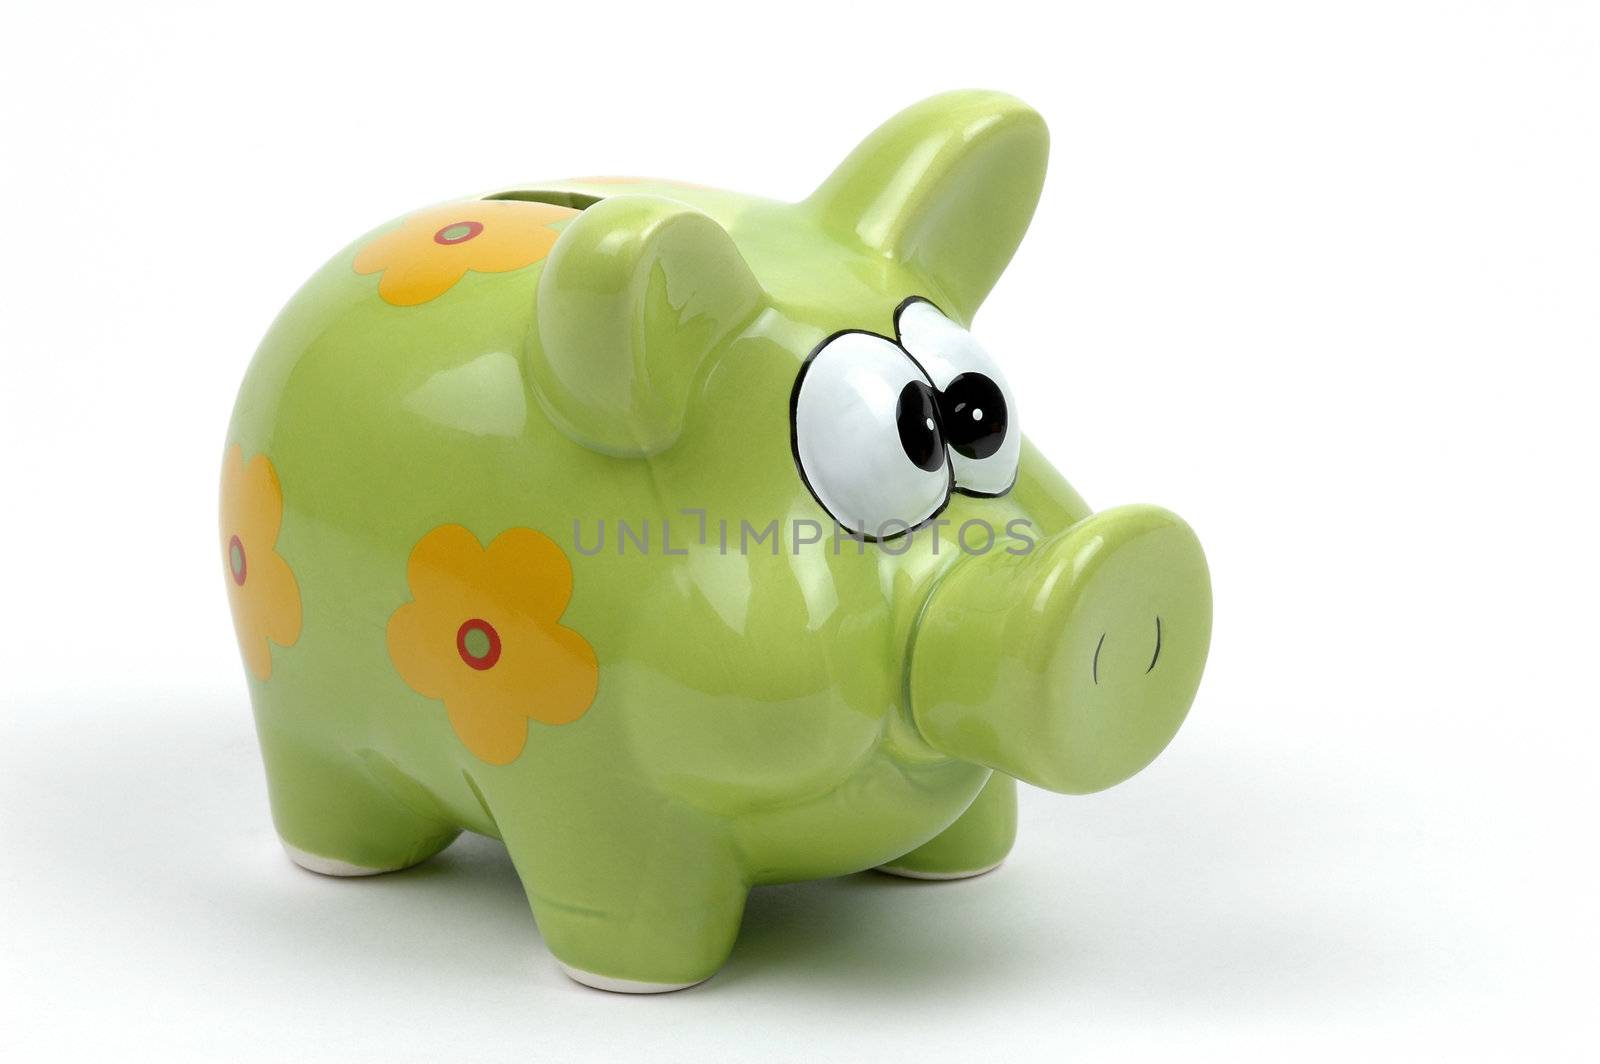 Piggy Bank by billberryphotography